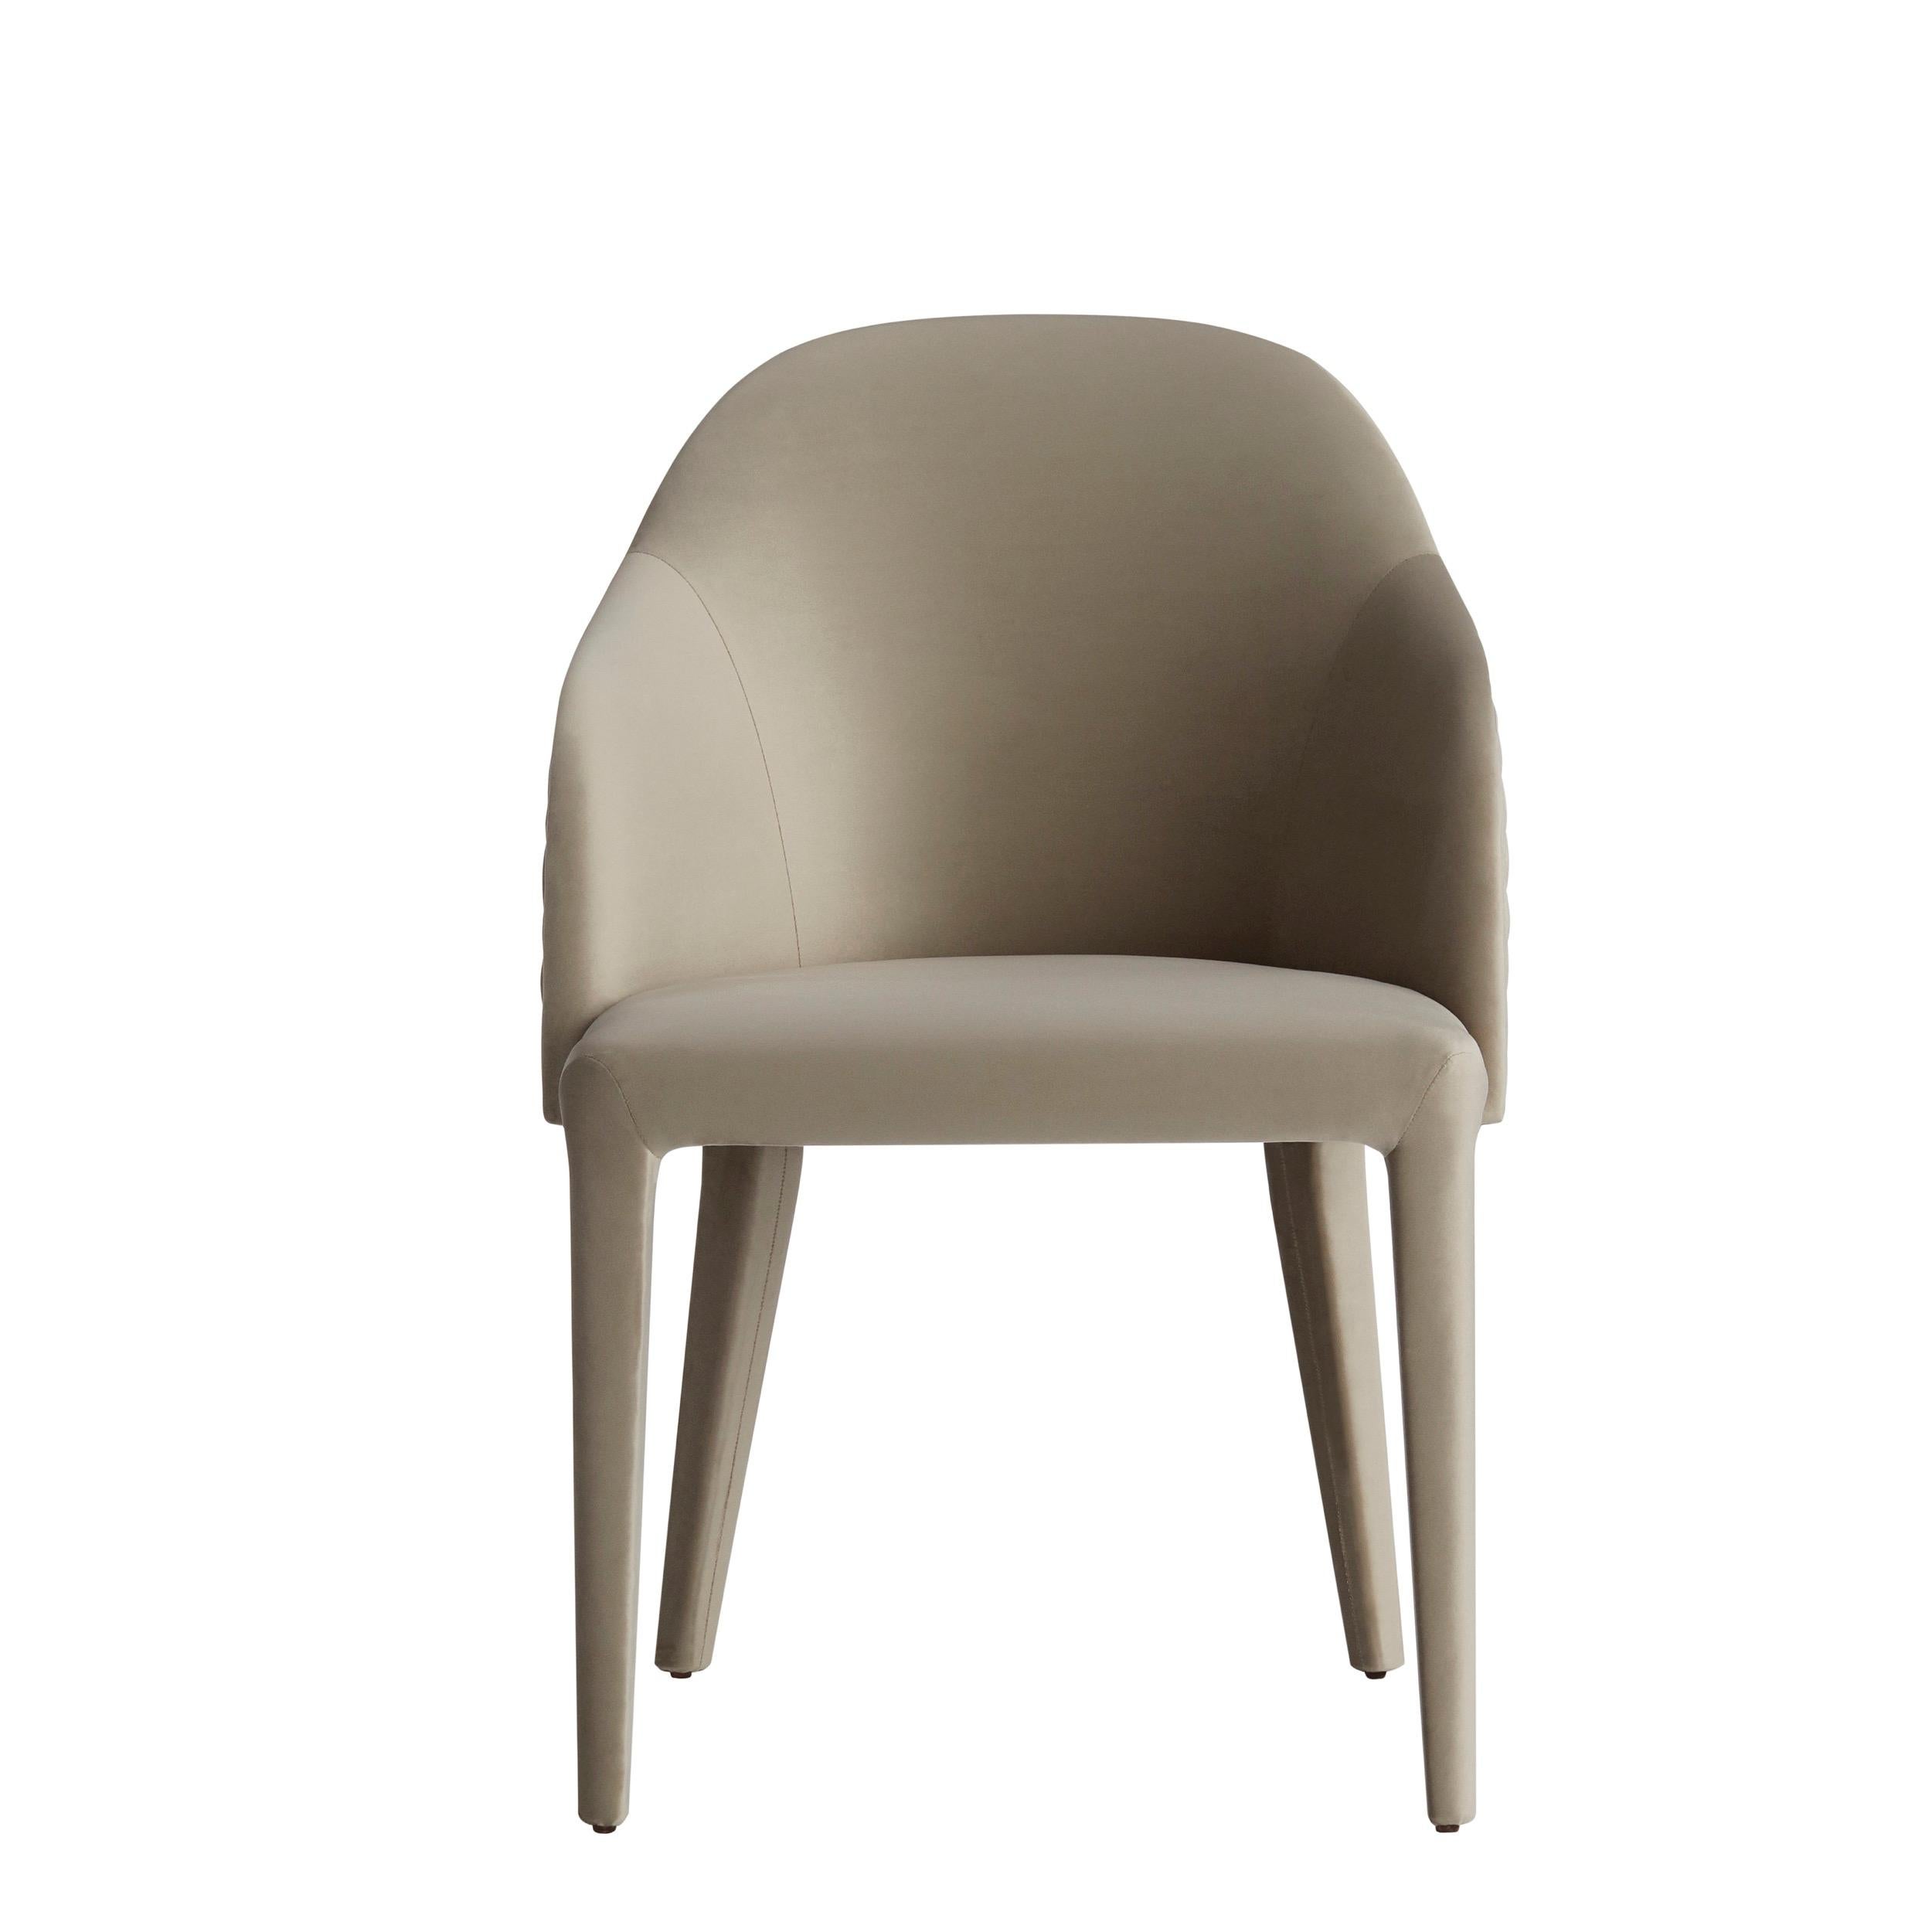 Rowling is a chair entirely upholstered in fabric, equipped with an enveloping backrest that in the back has an elegant diamond quilting.‎ This chair is also available in leather, eco-leather or COM.‎

Primary image: shown upholstered with